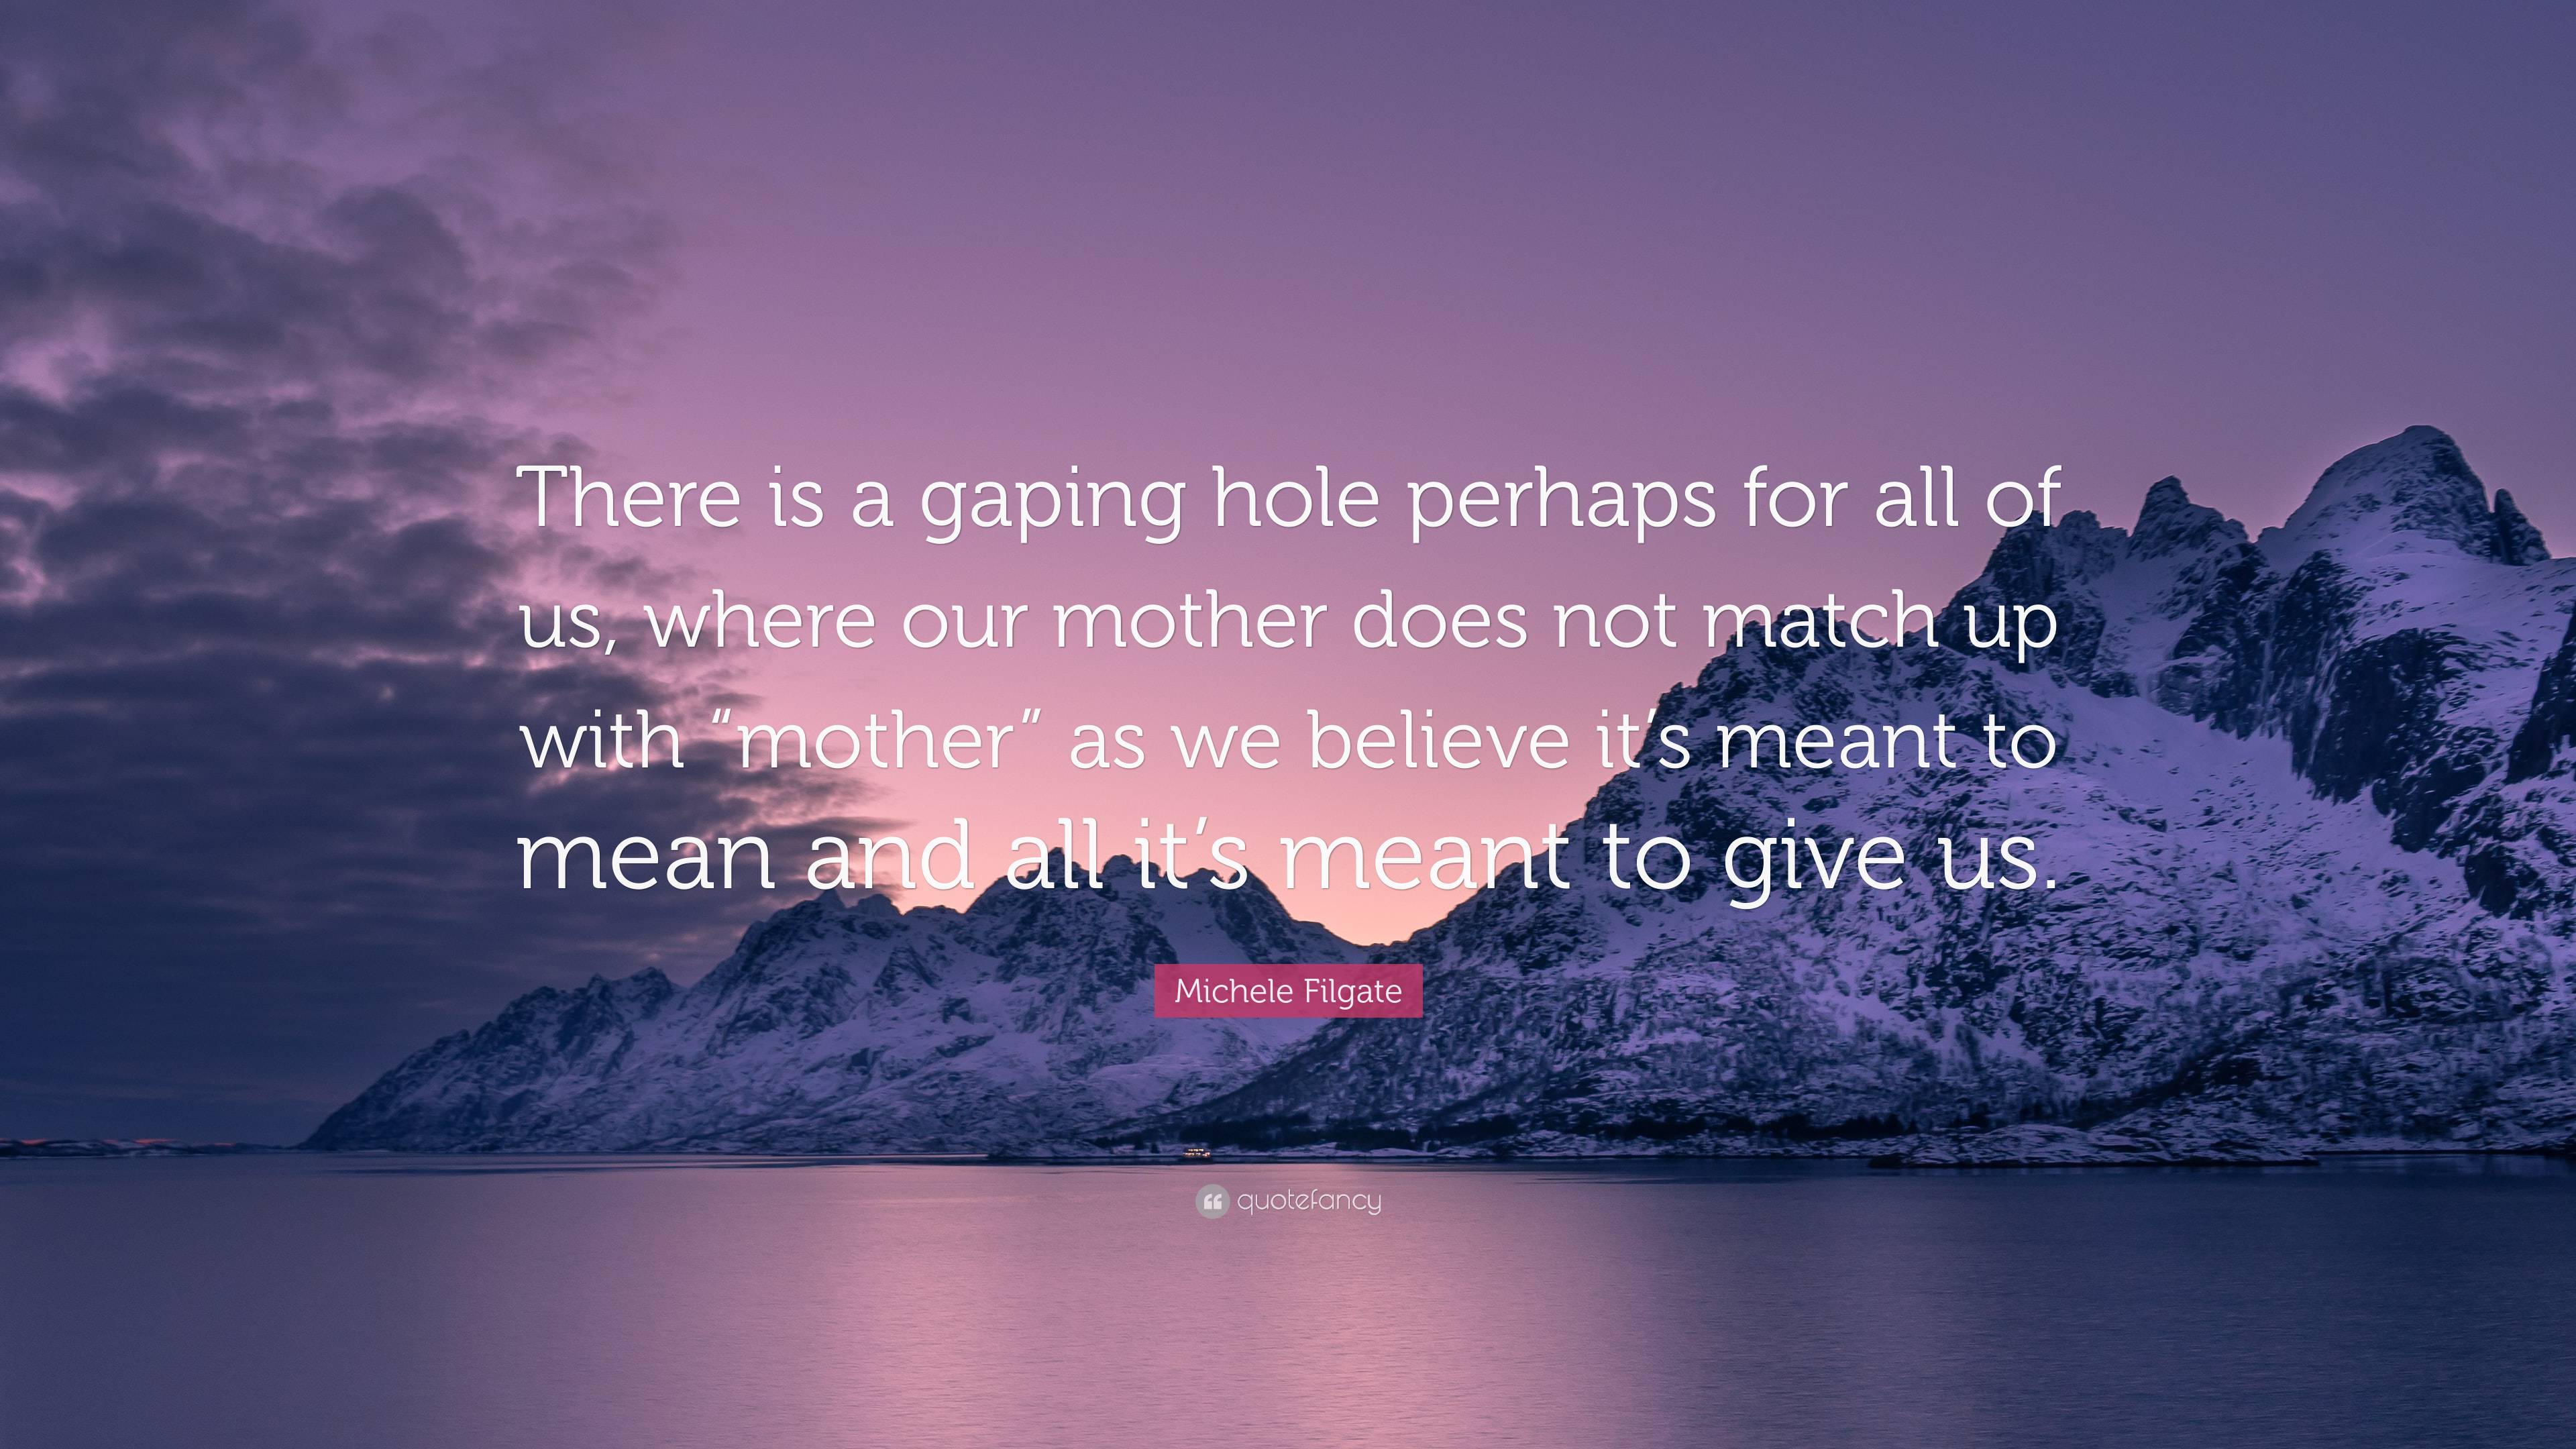 Michele Filgate Quote: “There is a gaping hole perhaps for all of us, where  our mother does not match up with “mother” as we believe it's meant ”